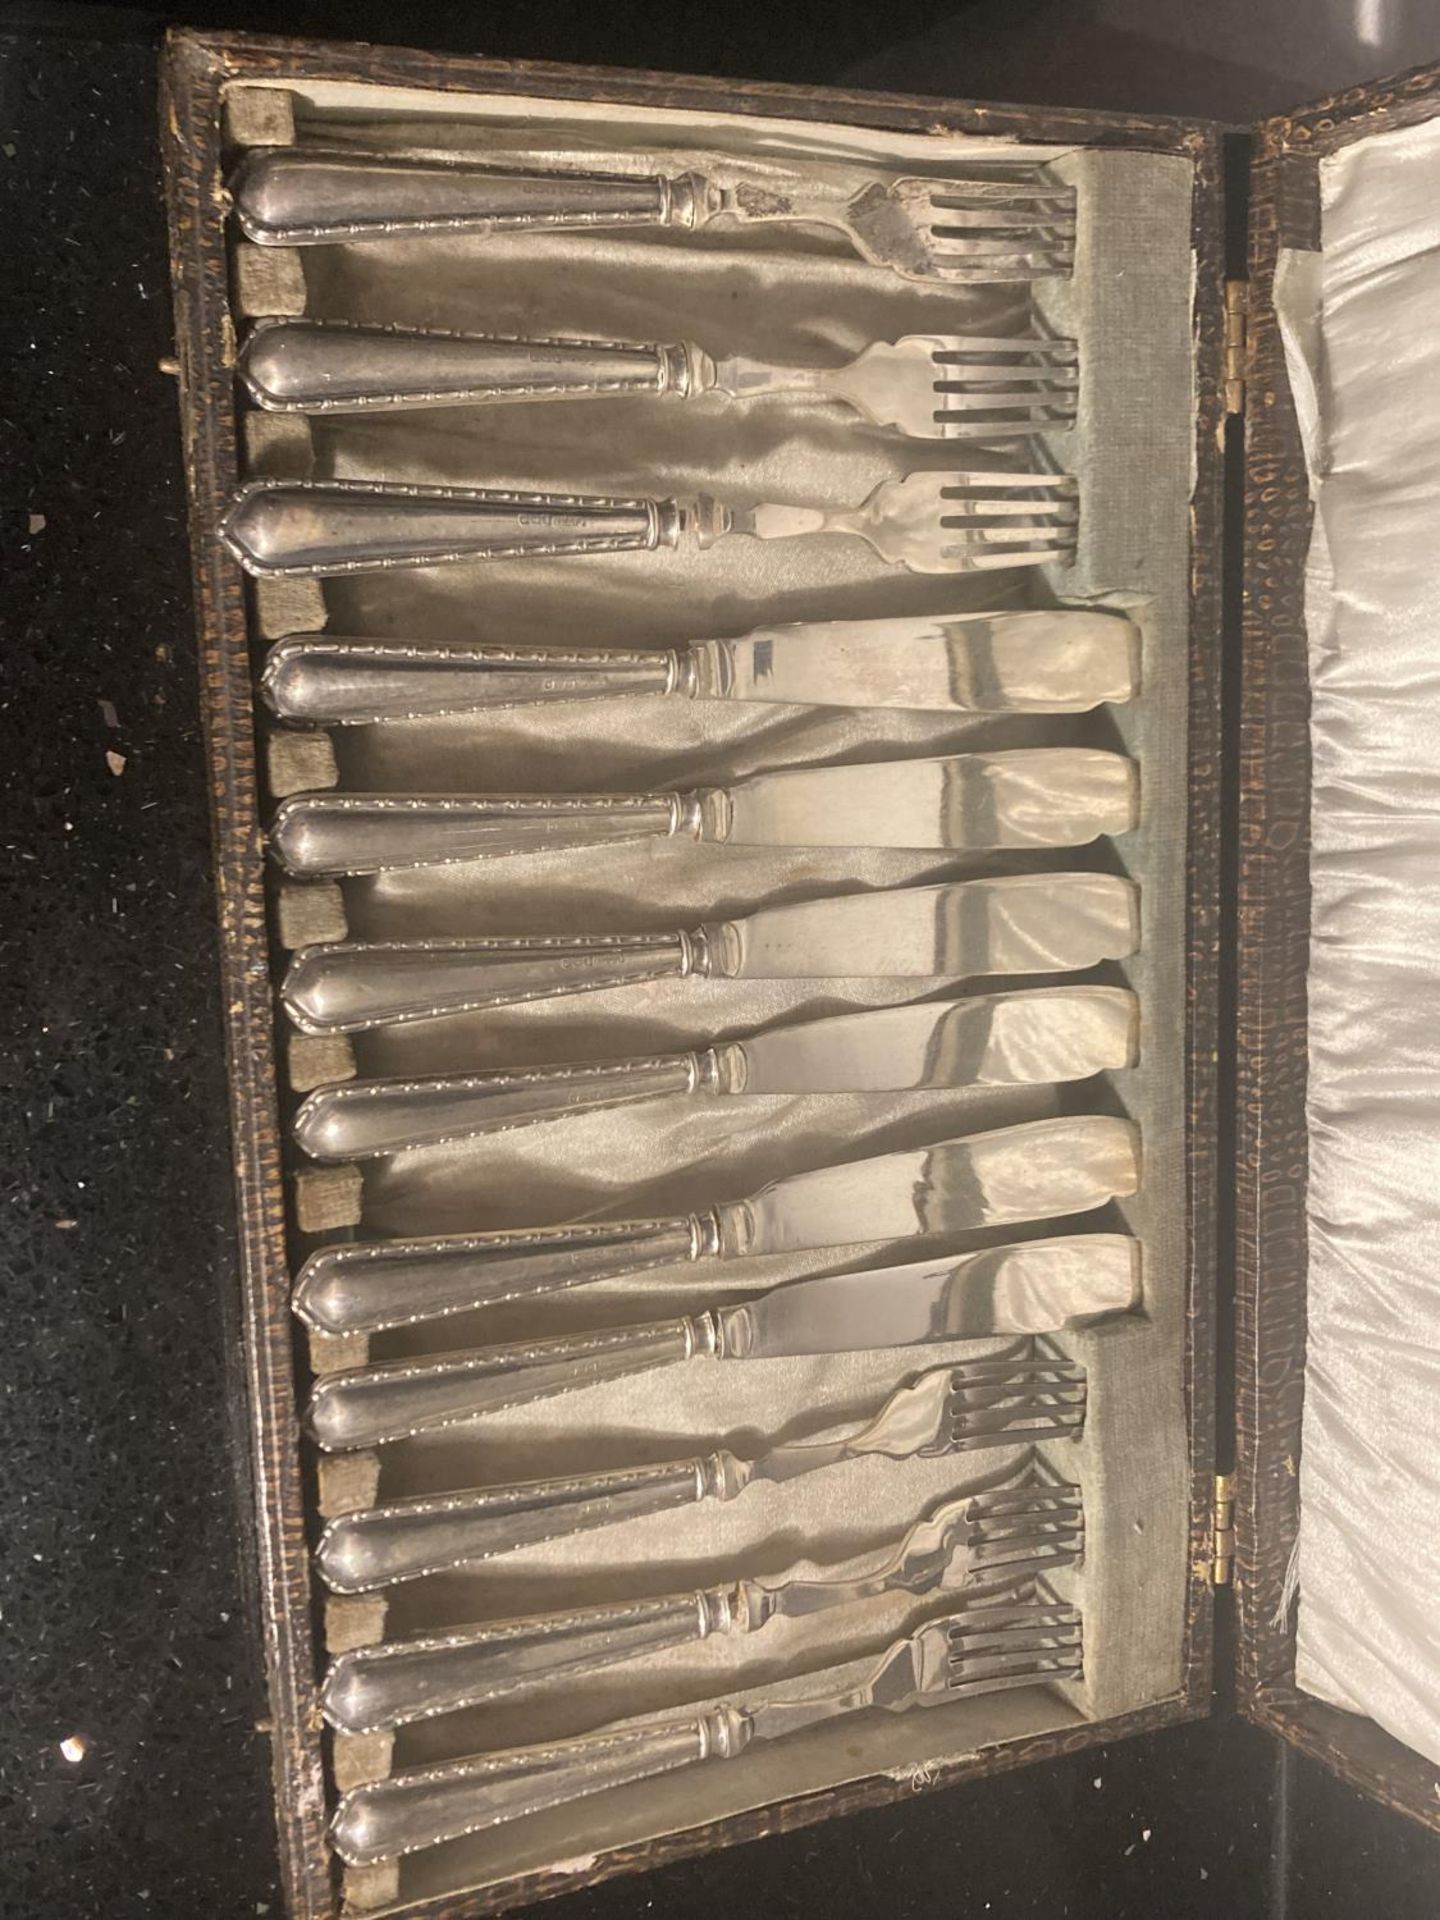 A SET OF HALLMARKED 1925 BIRMINGHAM SILVER FISH KNIVES AND FORKS IN A PRESENTATION BOX - Image 2 of 5